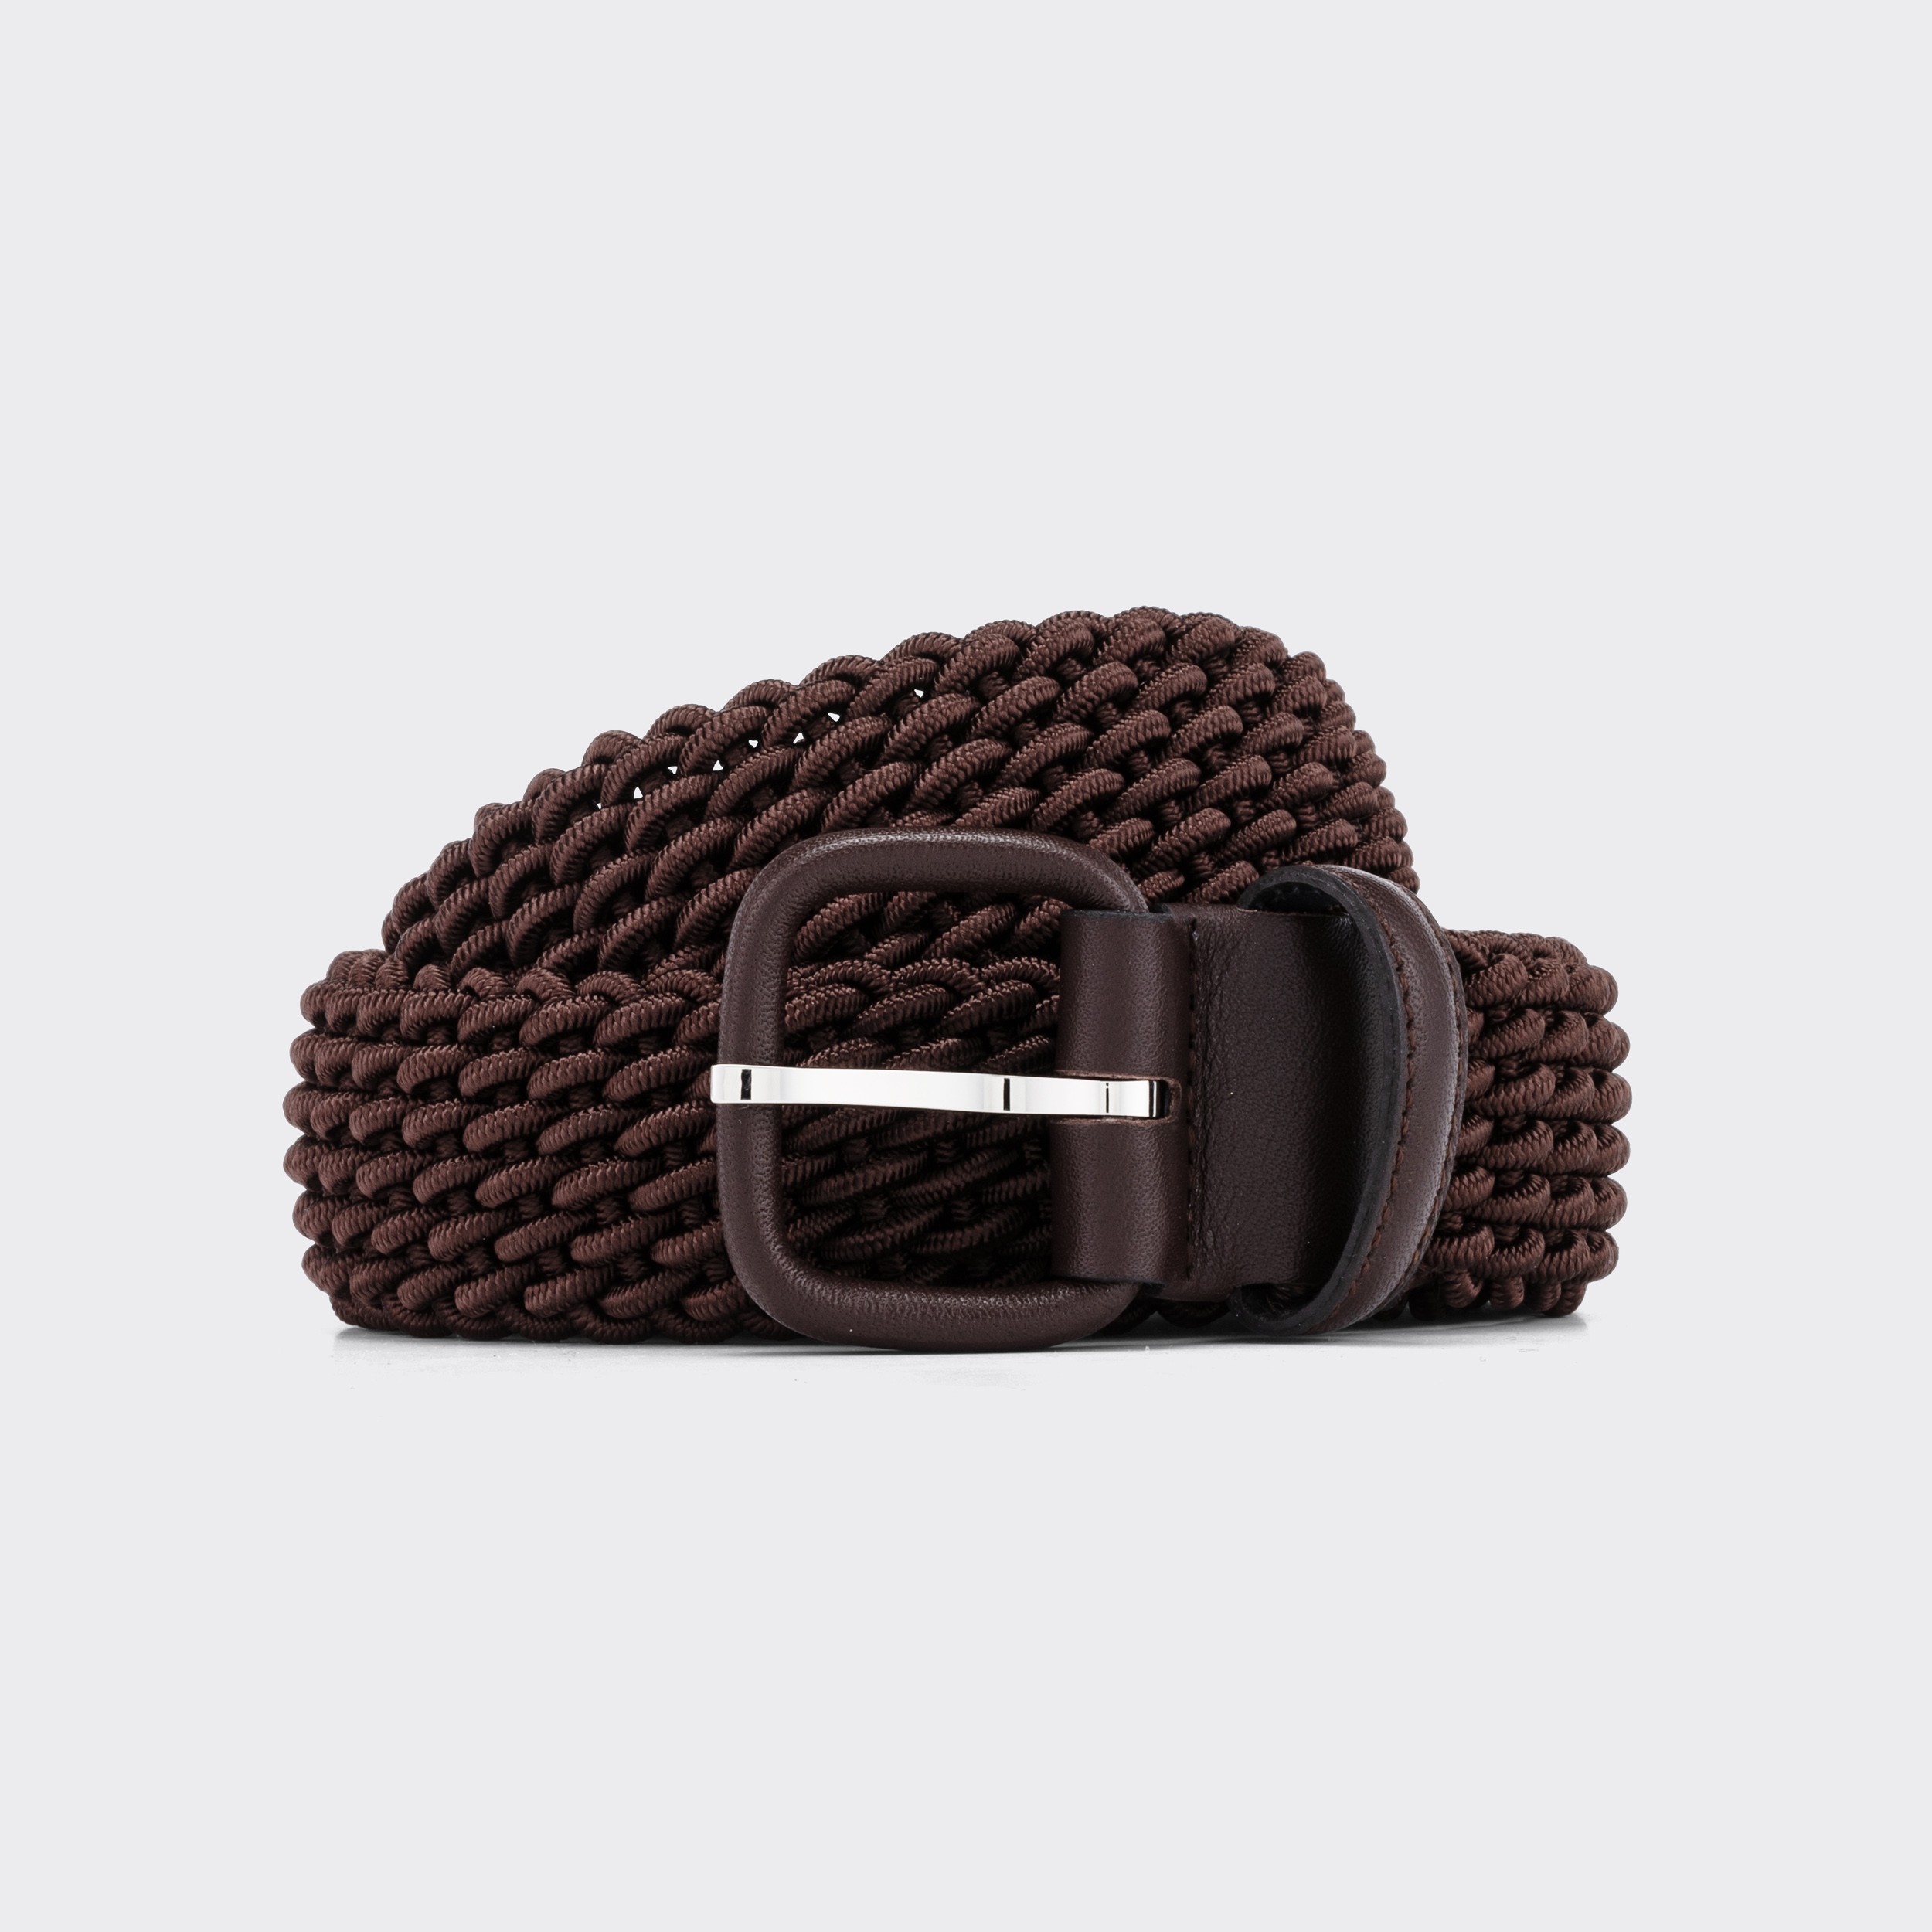 Anderson's Leather-Trimmed Woven Elastic Belt - Navy, Gray